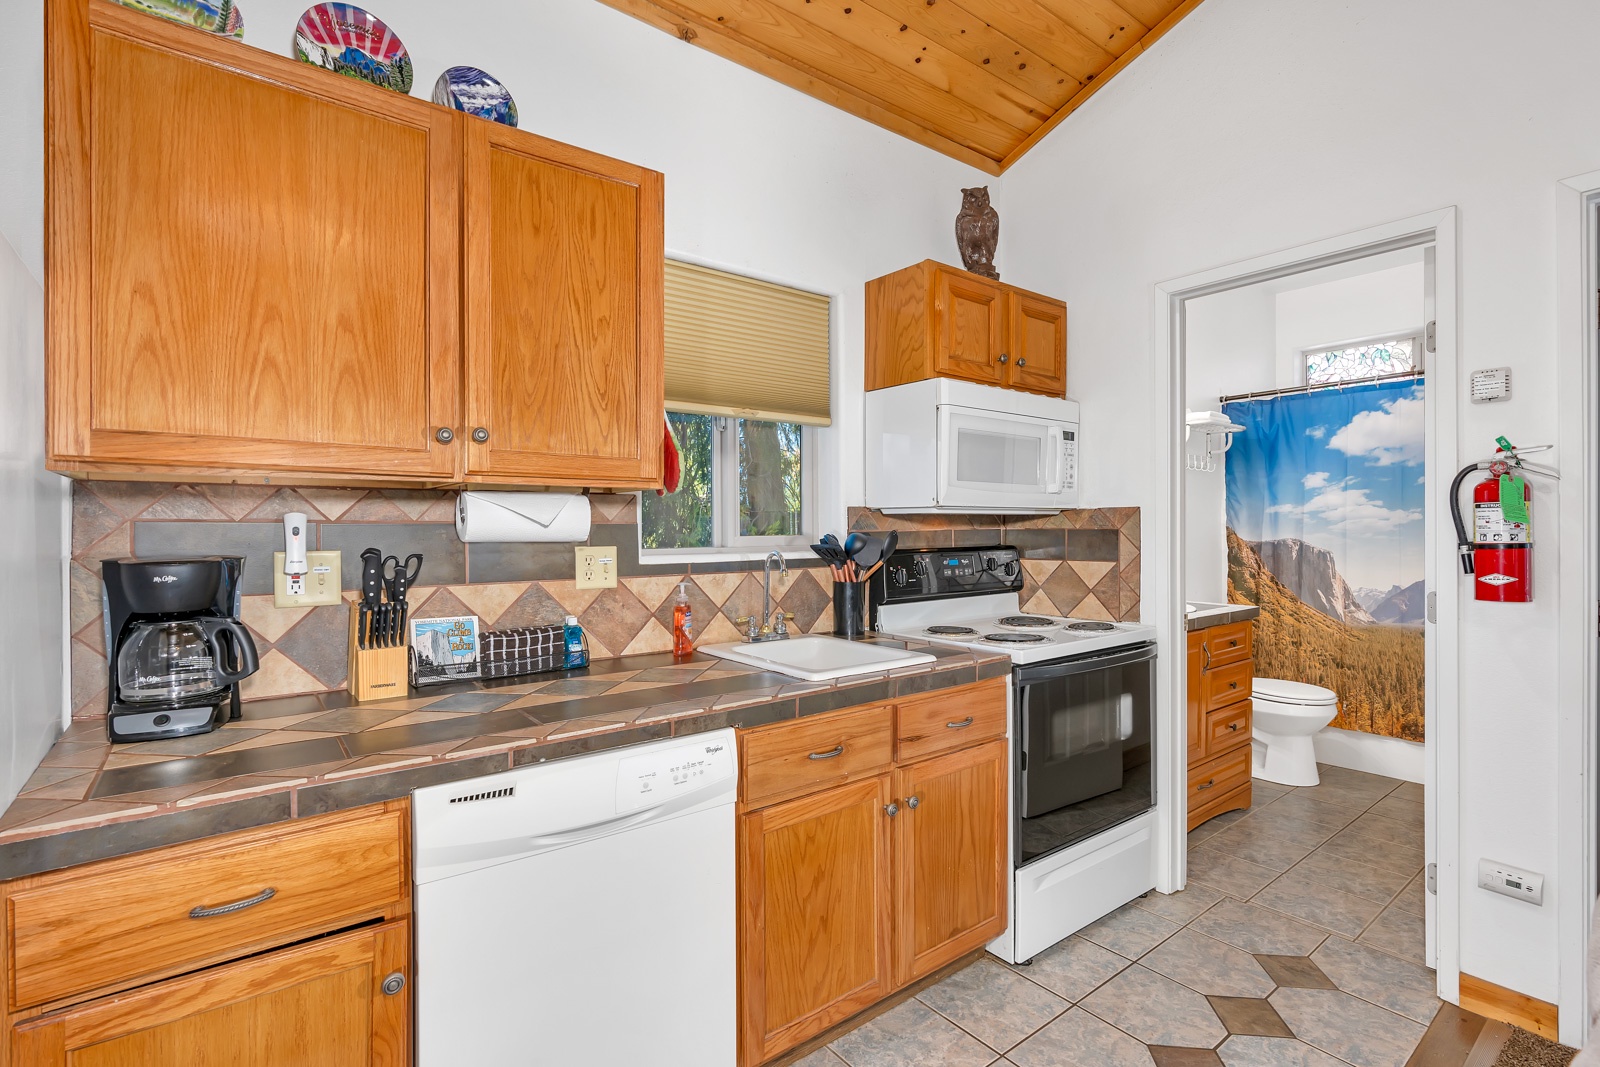 The kitchen offers ample space & all the comforts of home